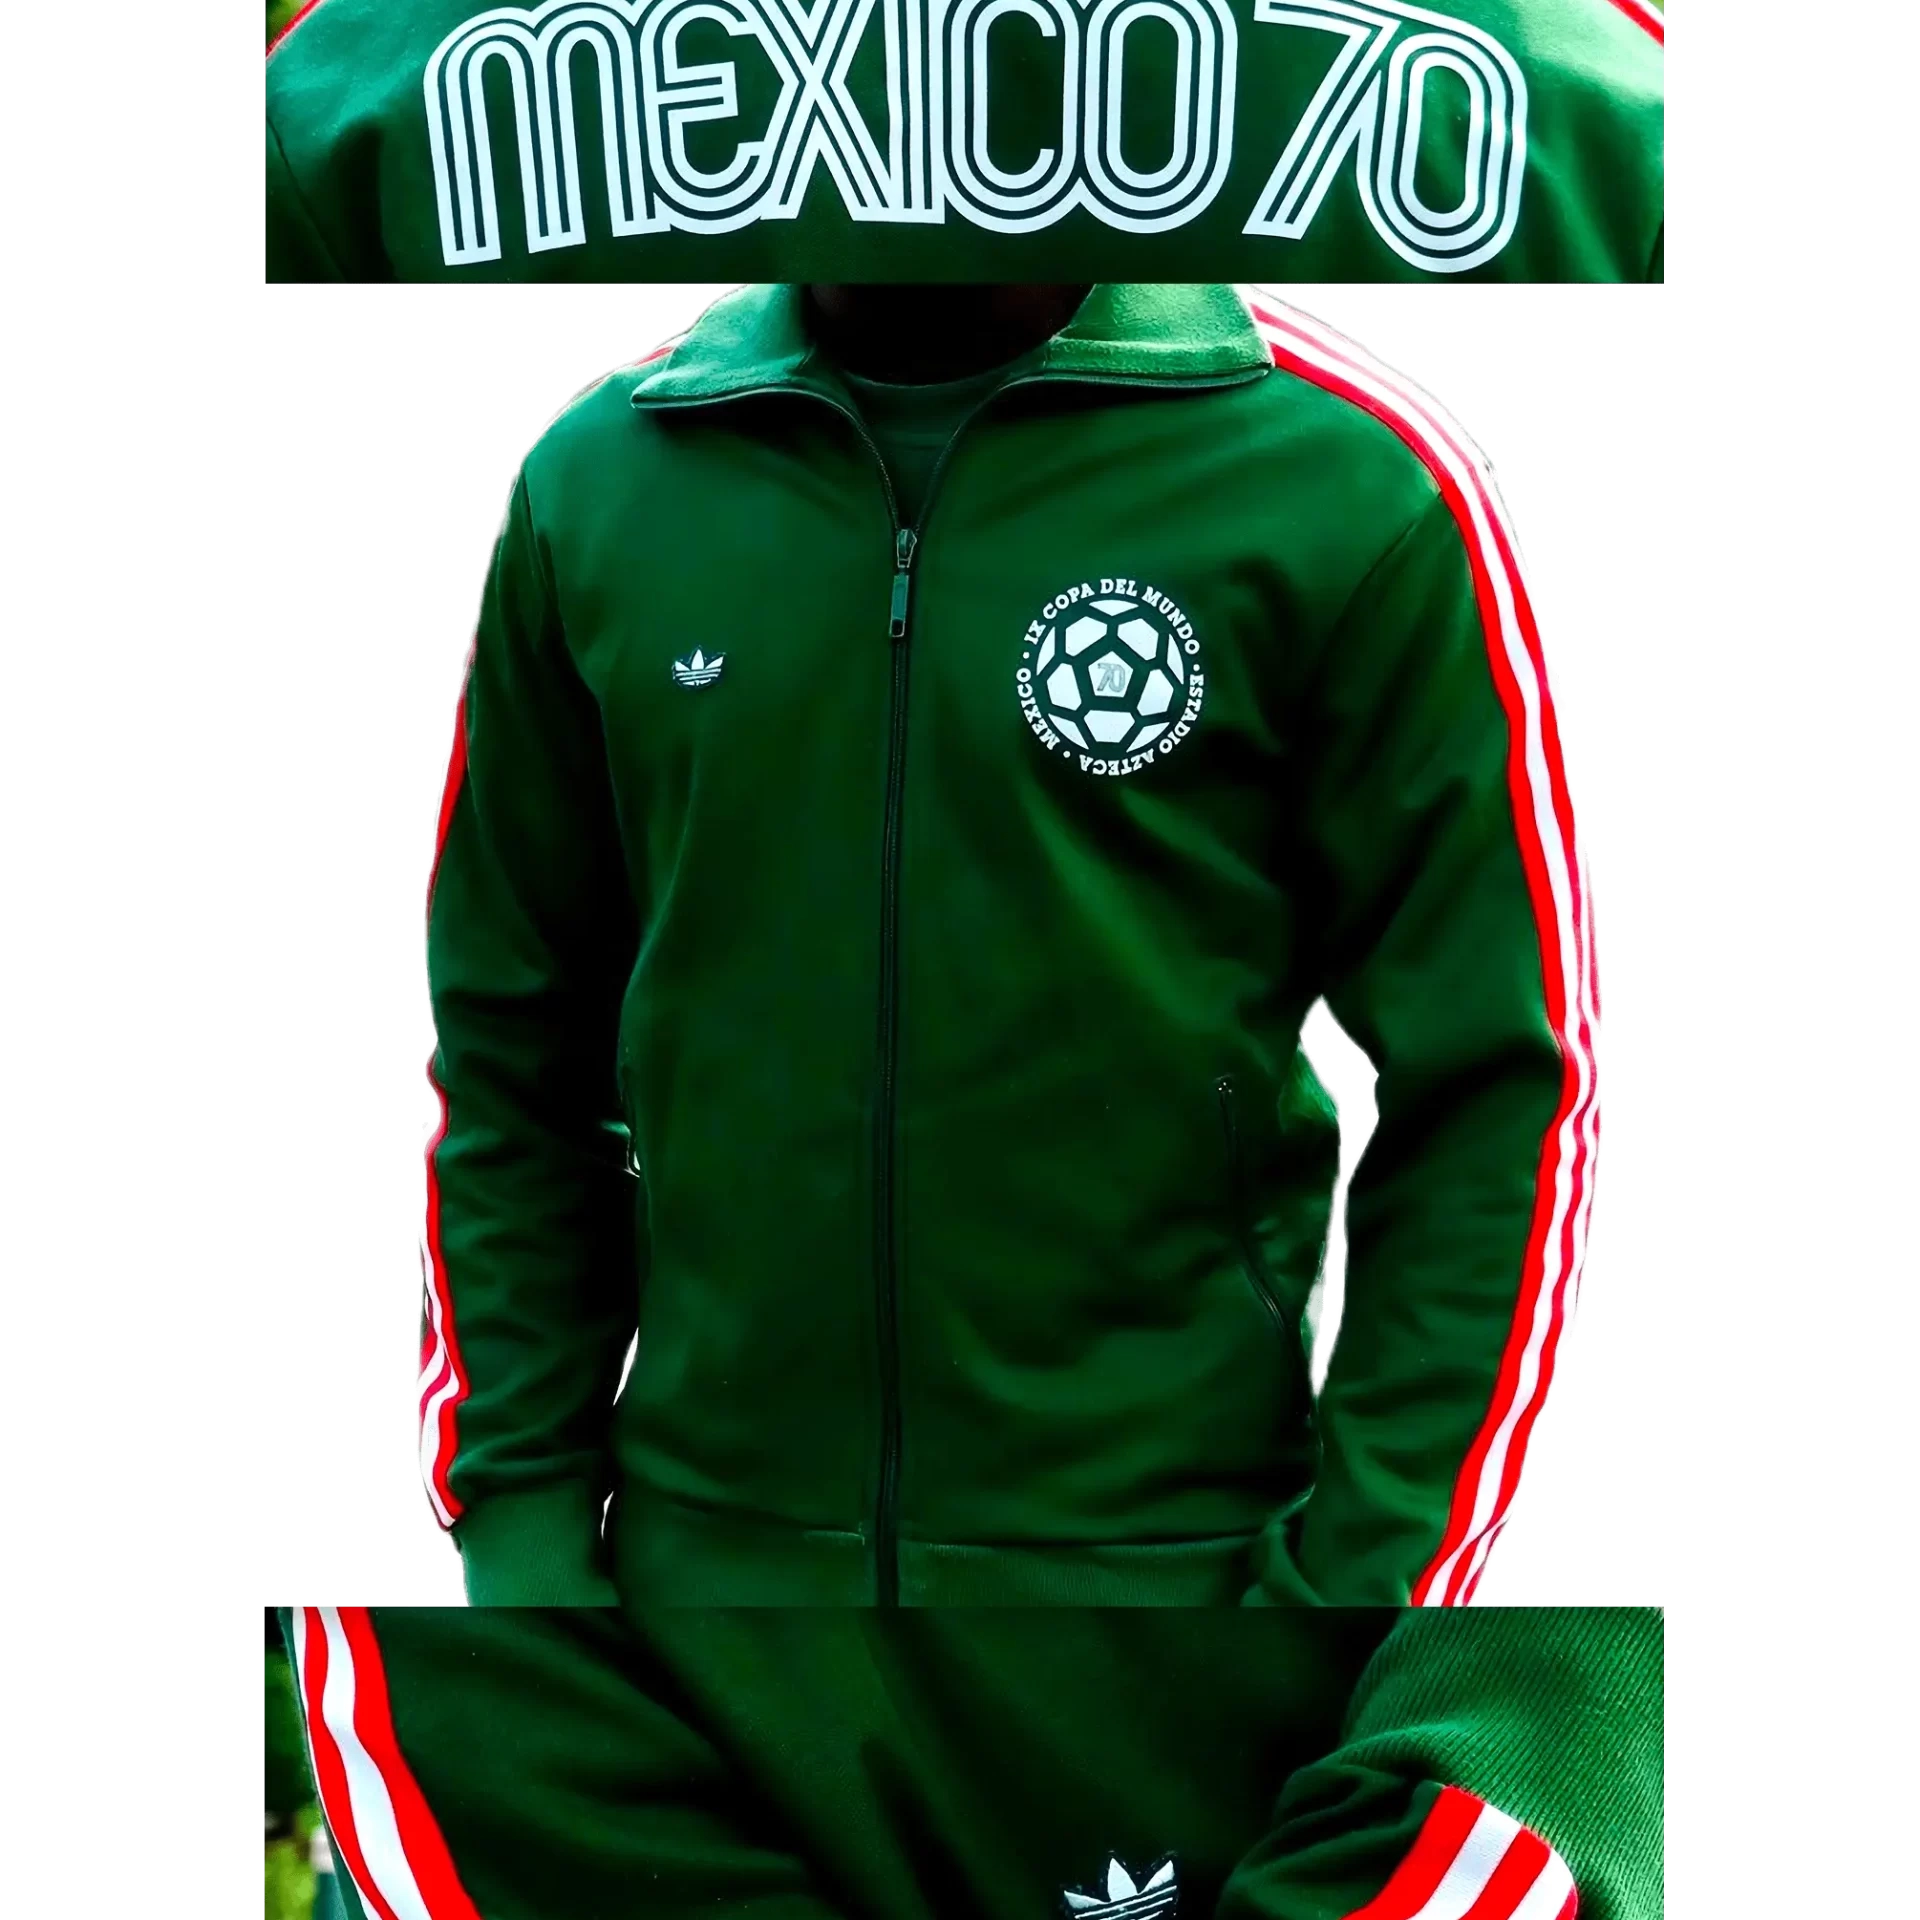 Men's 2005 Mexico World Cup 1970 TT by Adidas: Overjoyed (EnLawded.com file #lmchk67689ip2y123832kg9st)